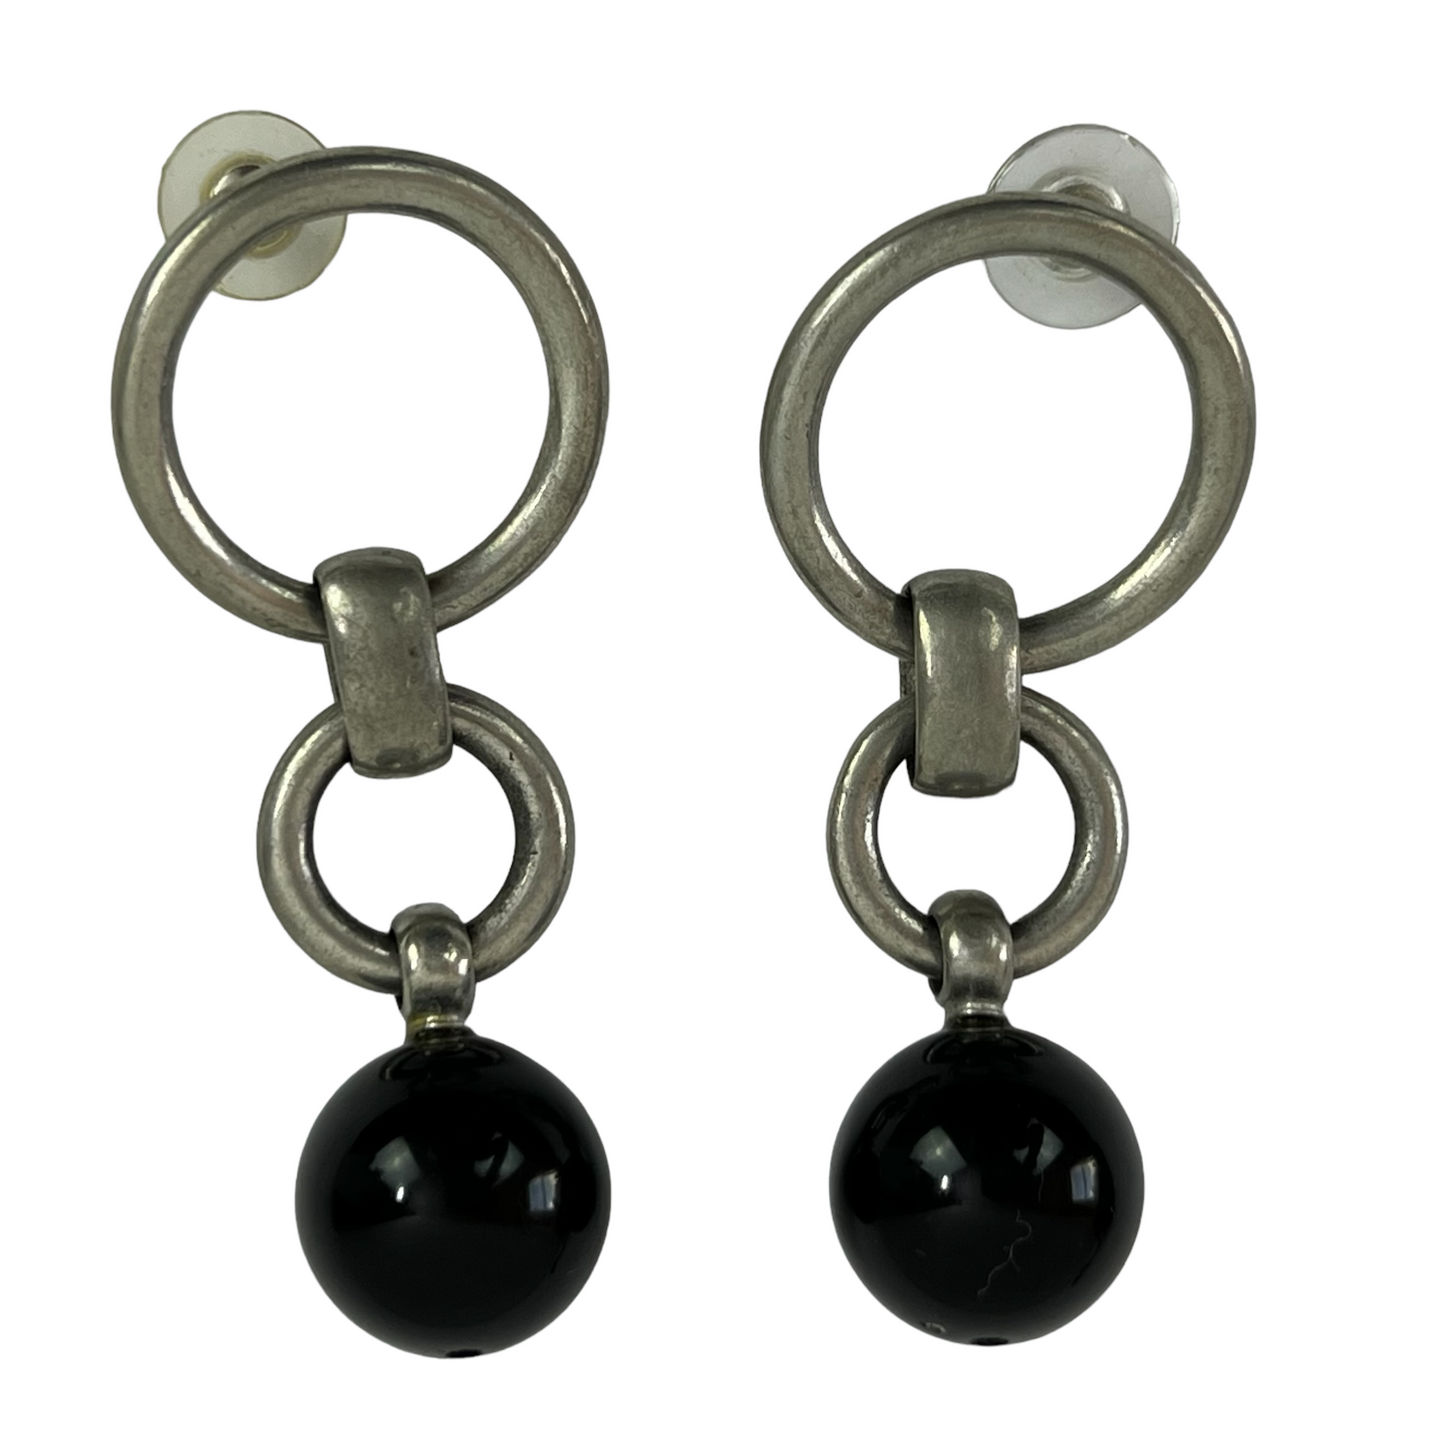 Ben Amun Dangle Ball Earrings.Black & silver dangle ball earrings by Ben Amun. Excellent vintage conditon.  Ben-Amun jewelry is handcrafted by skilled artisans in their atelier located in the Garment District of New York City. They pride themselves on using materials of the highest quality. Each jewelry piece is handmade, which takes time and skill to produce. Most of our artisans have been with with them for over 30 years.